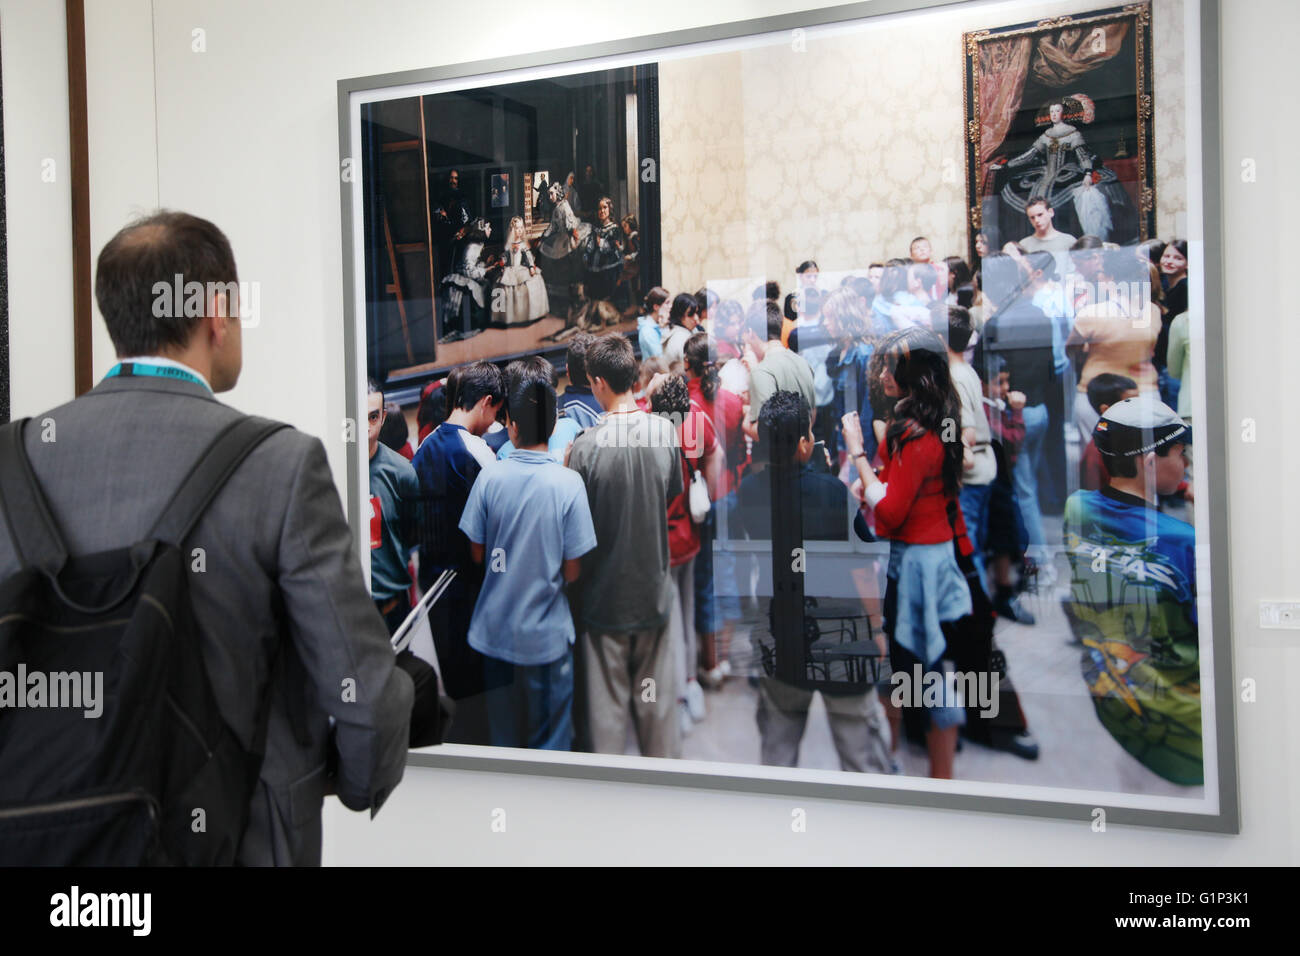 London, UK. 18th May, 2016. Photo London which opens on 19 May 2016 in Somerset House brings together 80 of the world’s leading galleries in a major international fair. Photo London was created to give London an international photography event befitting the city’s status global cultural capital. Credit:  Dinendra Haria/Alamy Live News Stock Photo